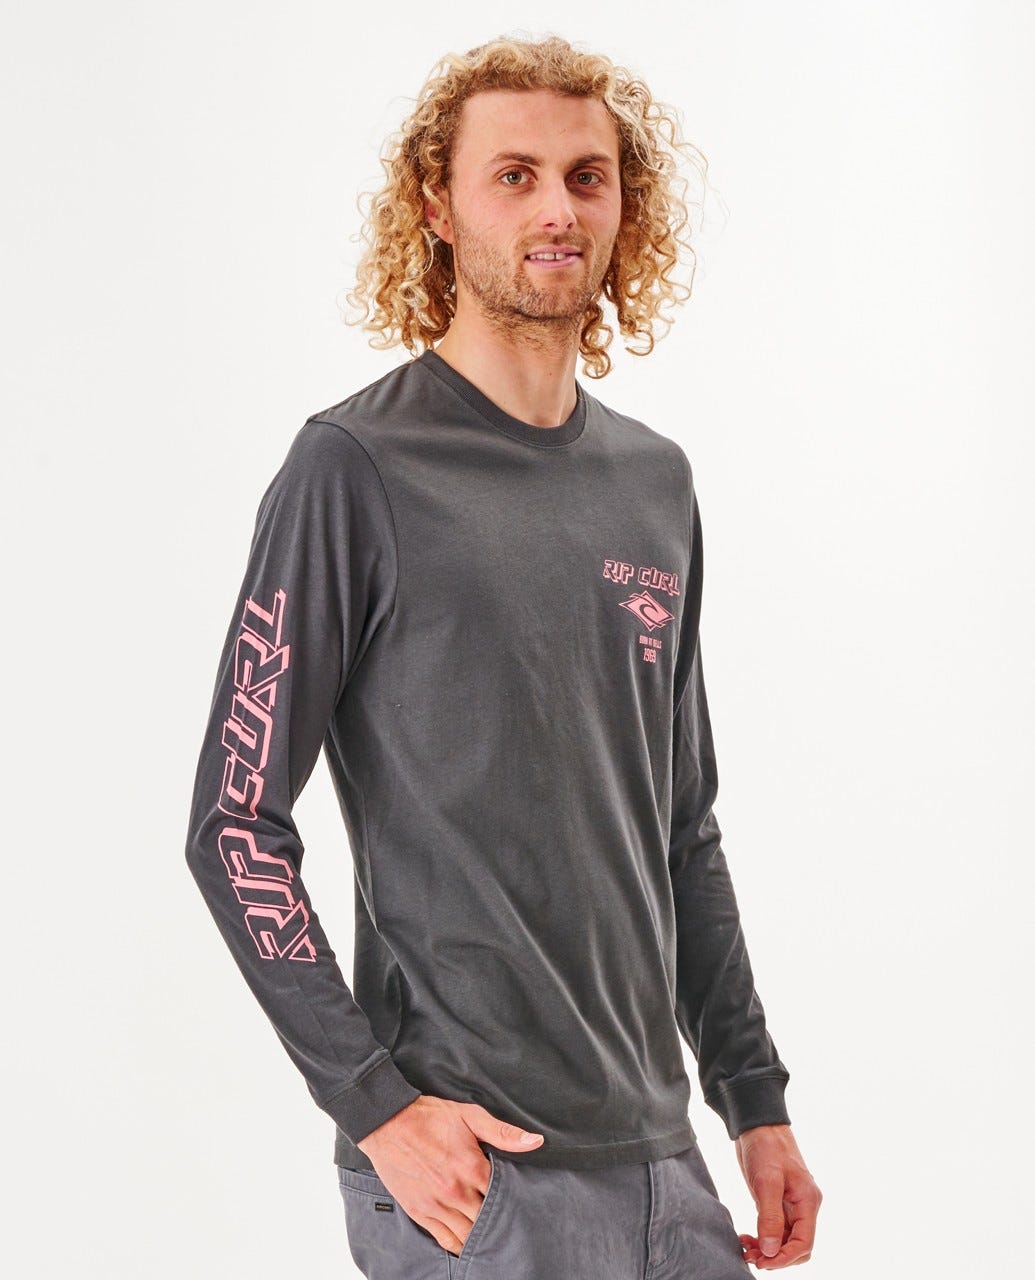 RIP CURL FADE OUT ICON L/S CTEVY9-0378 T-SHIRT LONG SLEEVE (M)